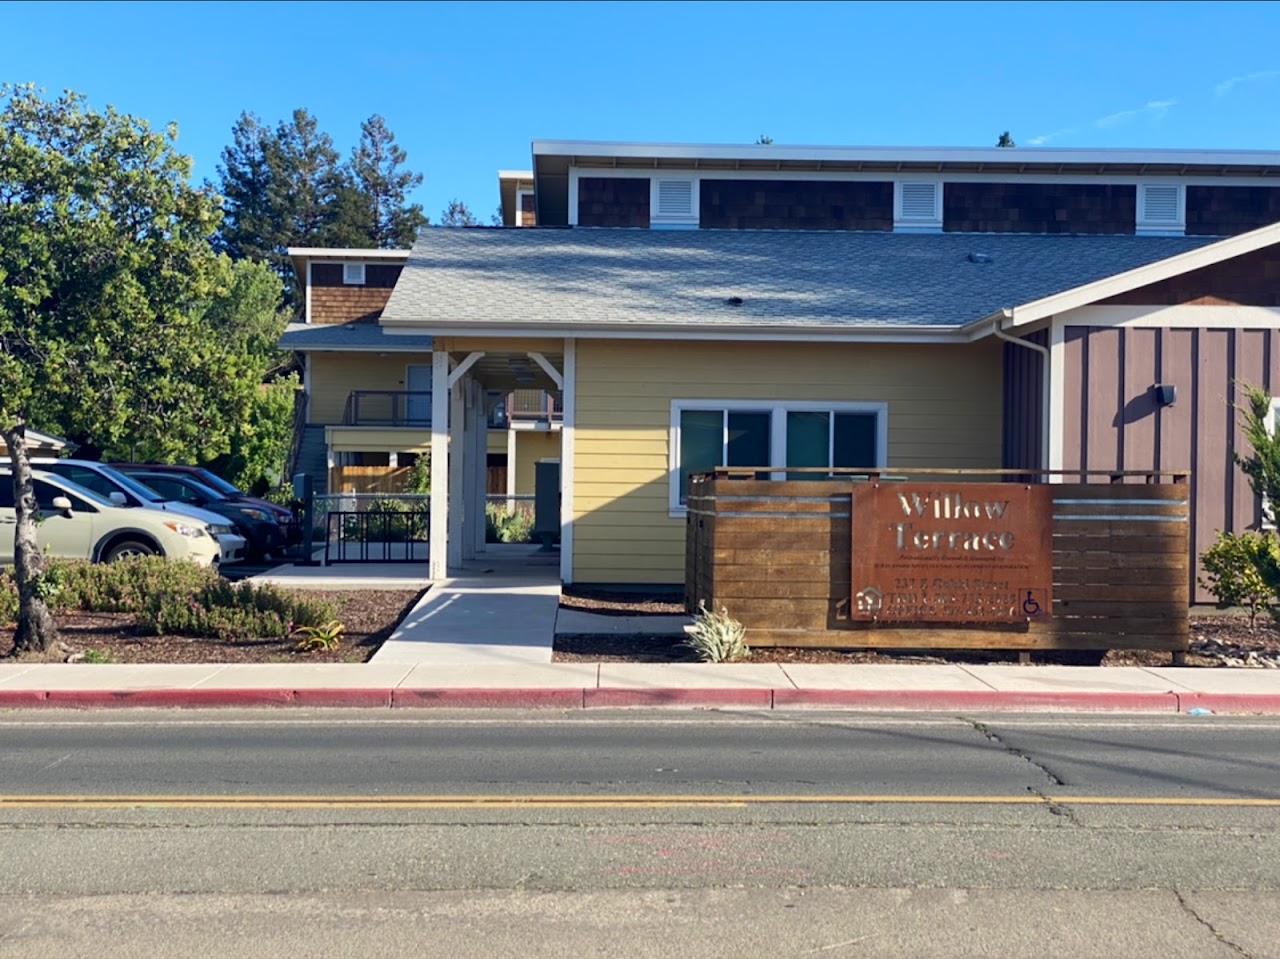 Photo of WILLOW TERRACE. Affordable housing located at 237 EAST GOBBI STREET UKIAH, CA 95482